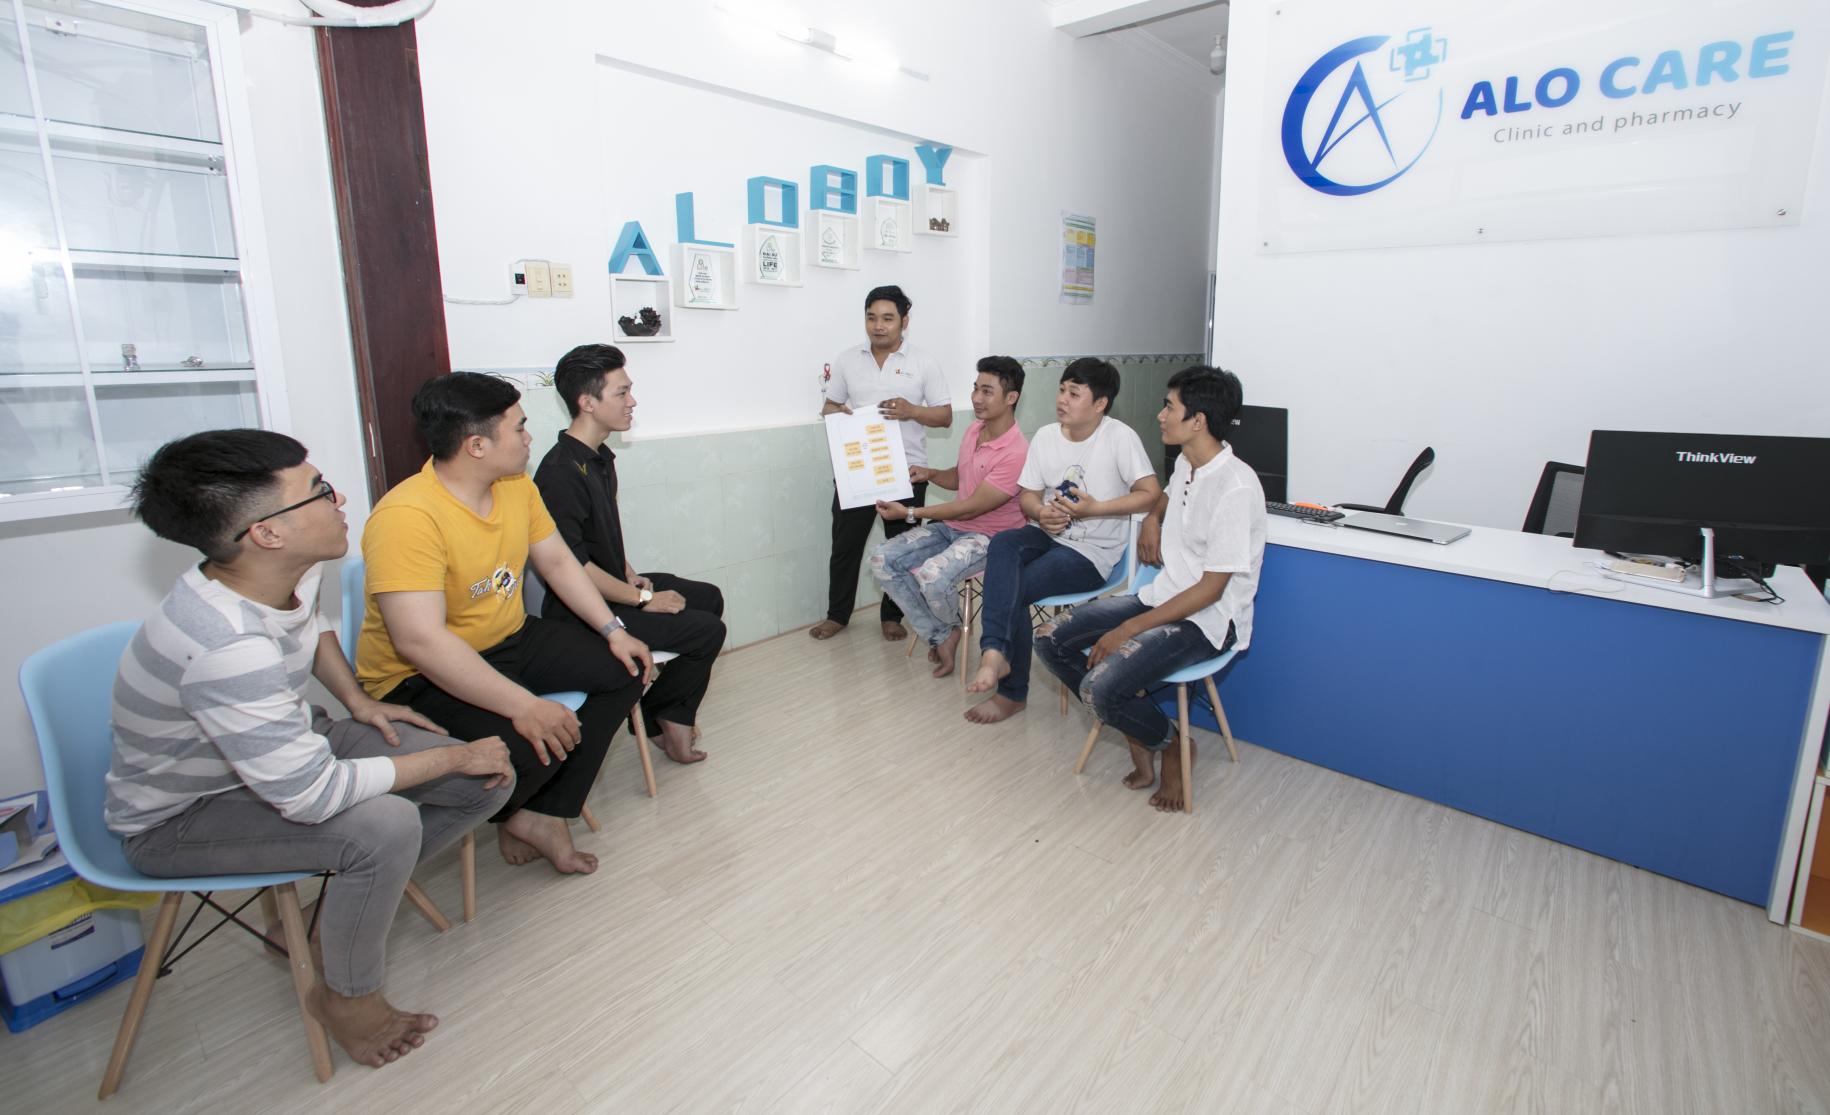 Thuan and his self-help group together inside Alo Care.